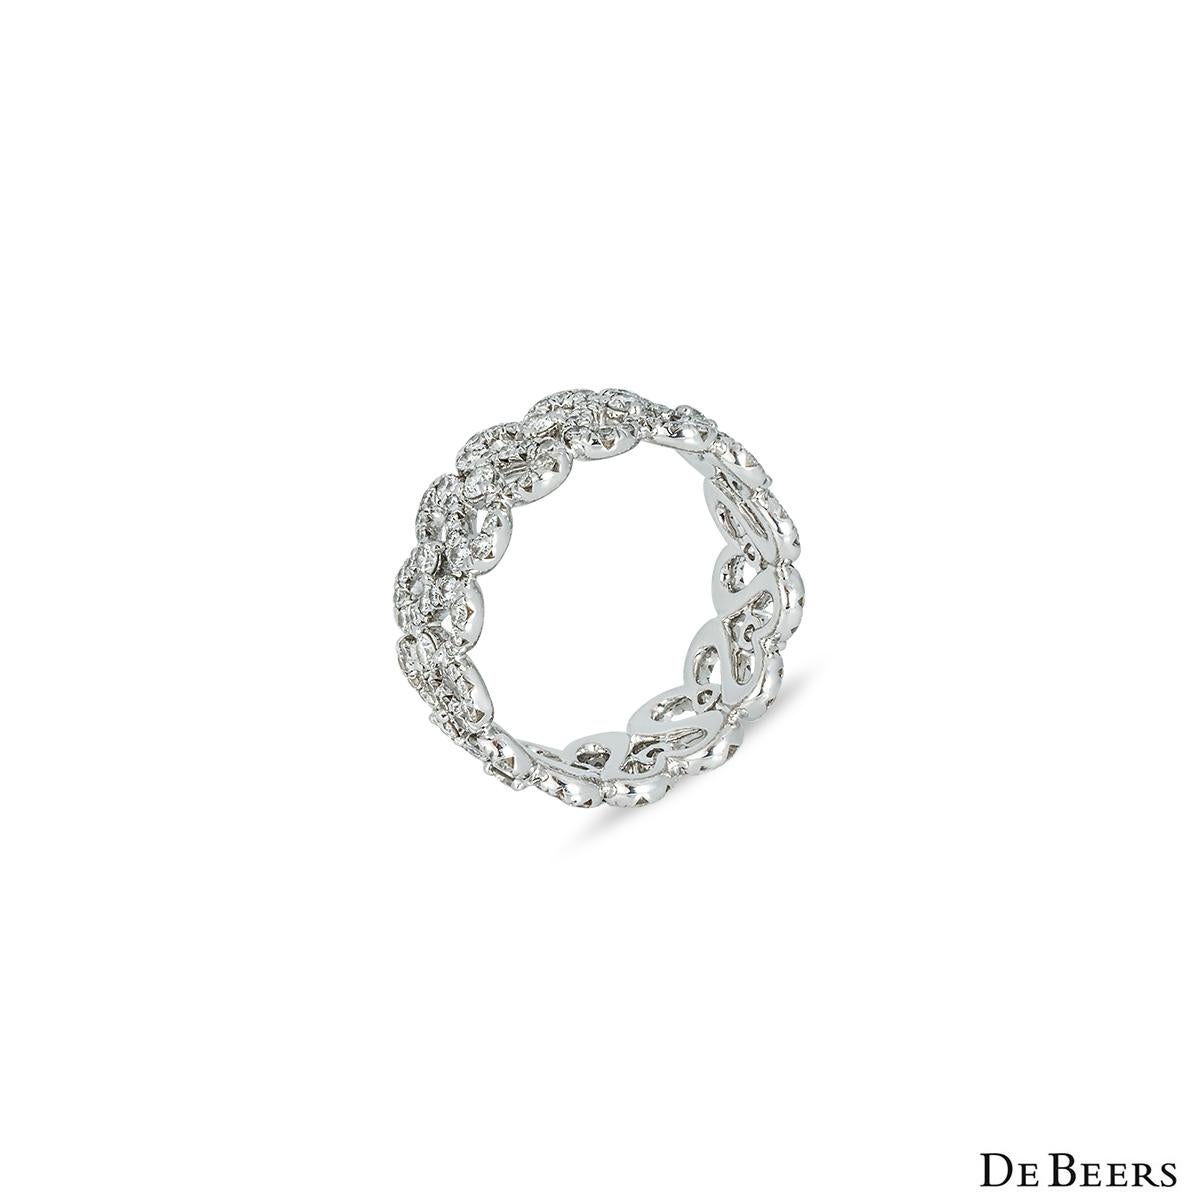 An elegant 18k white gold diamond ring by De Beers from the Classics collection. The band is set with 7 openwork motifs portraying two swans entwined together, set with micro-pave diamonds. Where each motif meets there is a single round brilliant